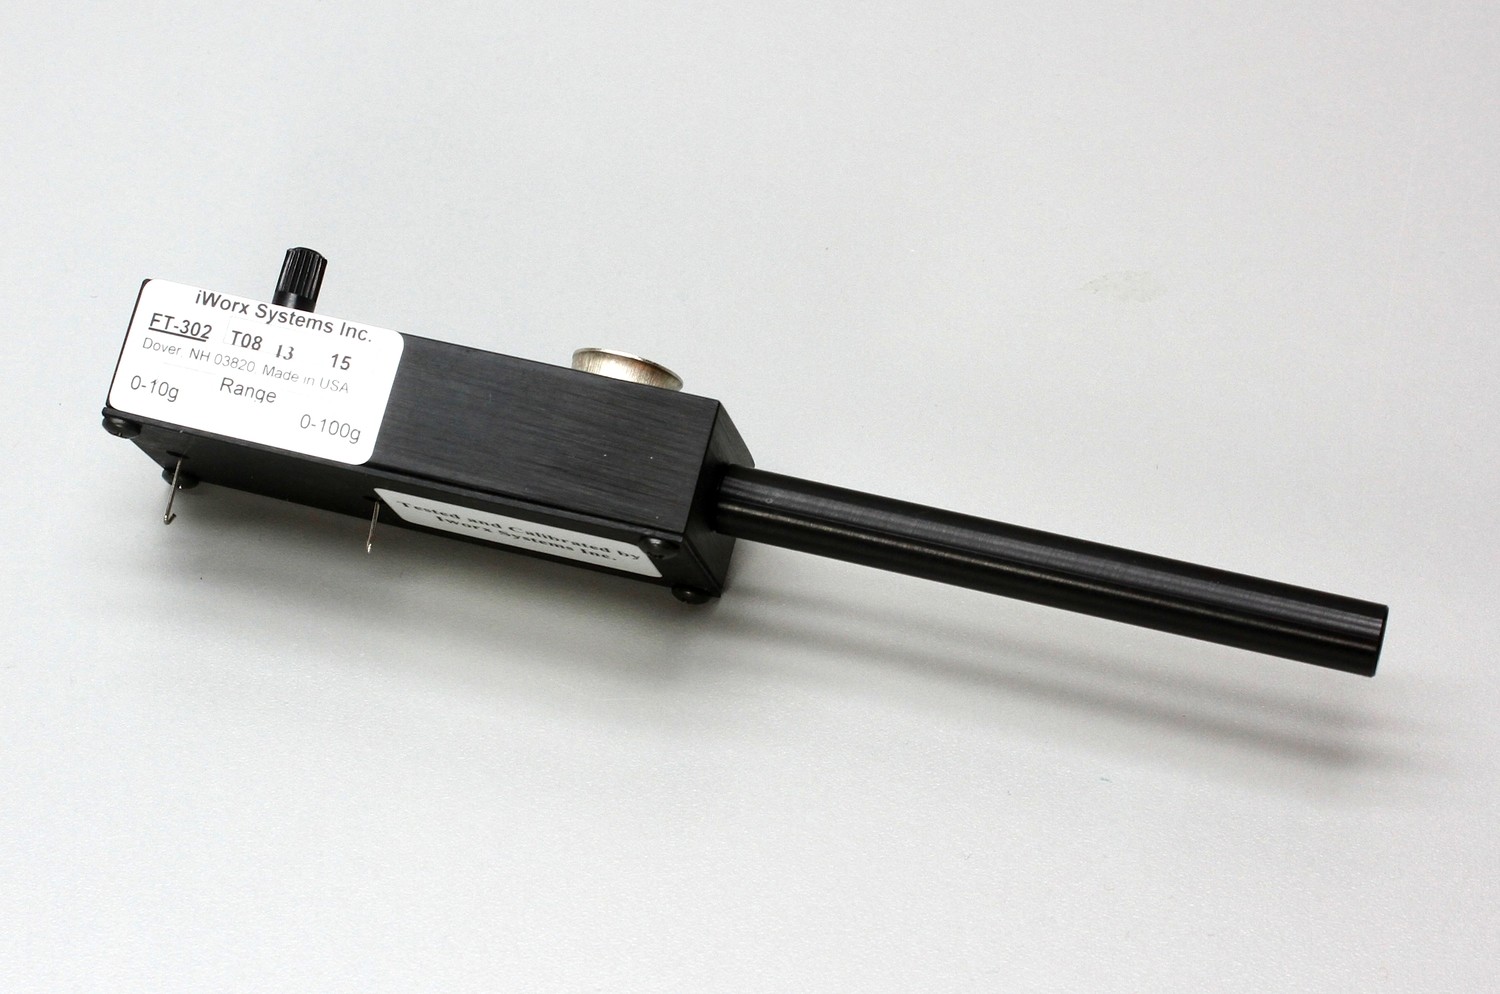 Dual Range Force Transducer (0 to 10g and 0 to 100g)